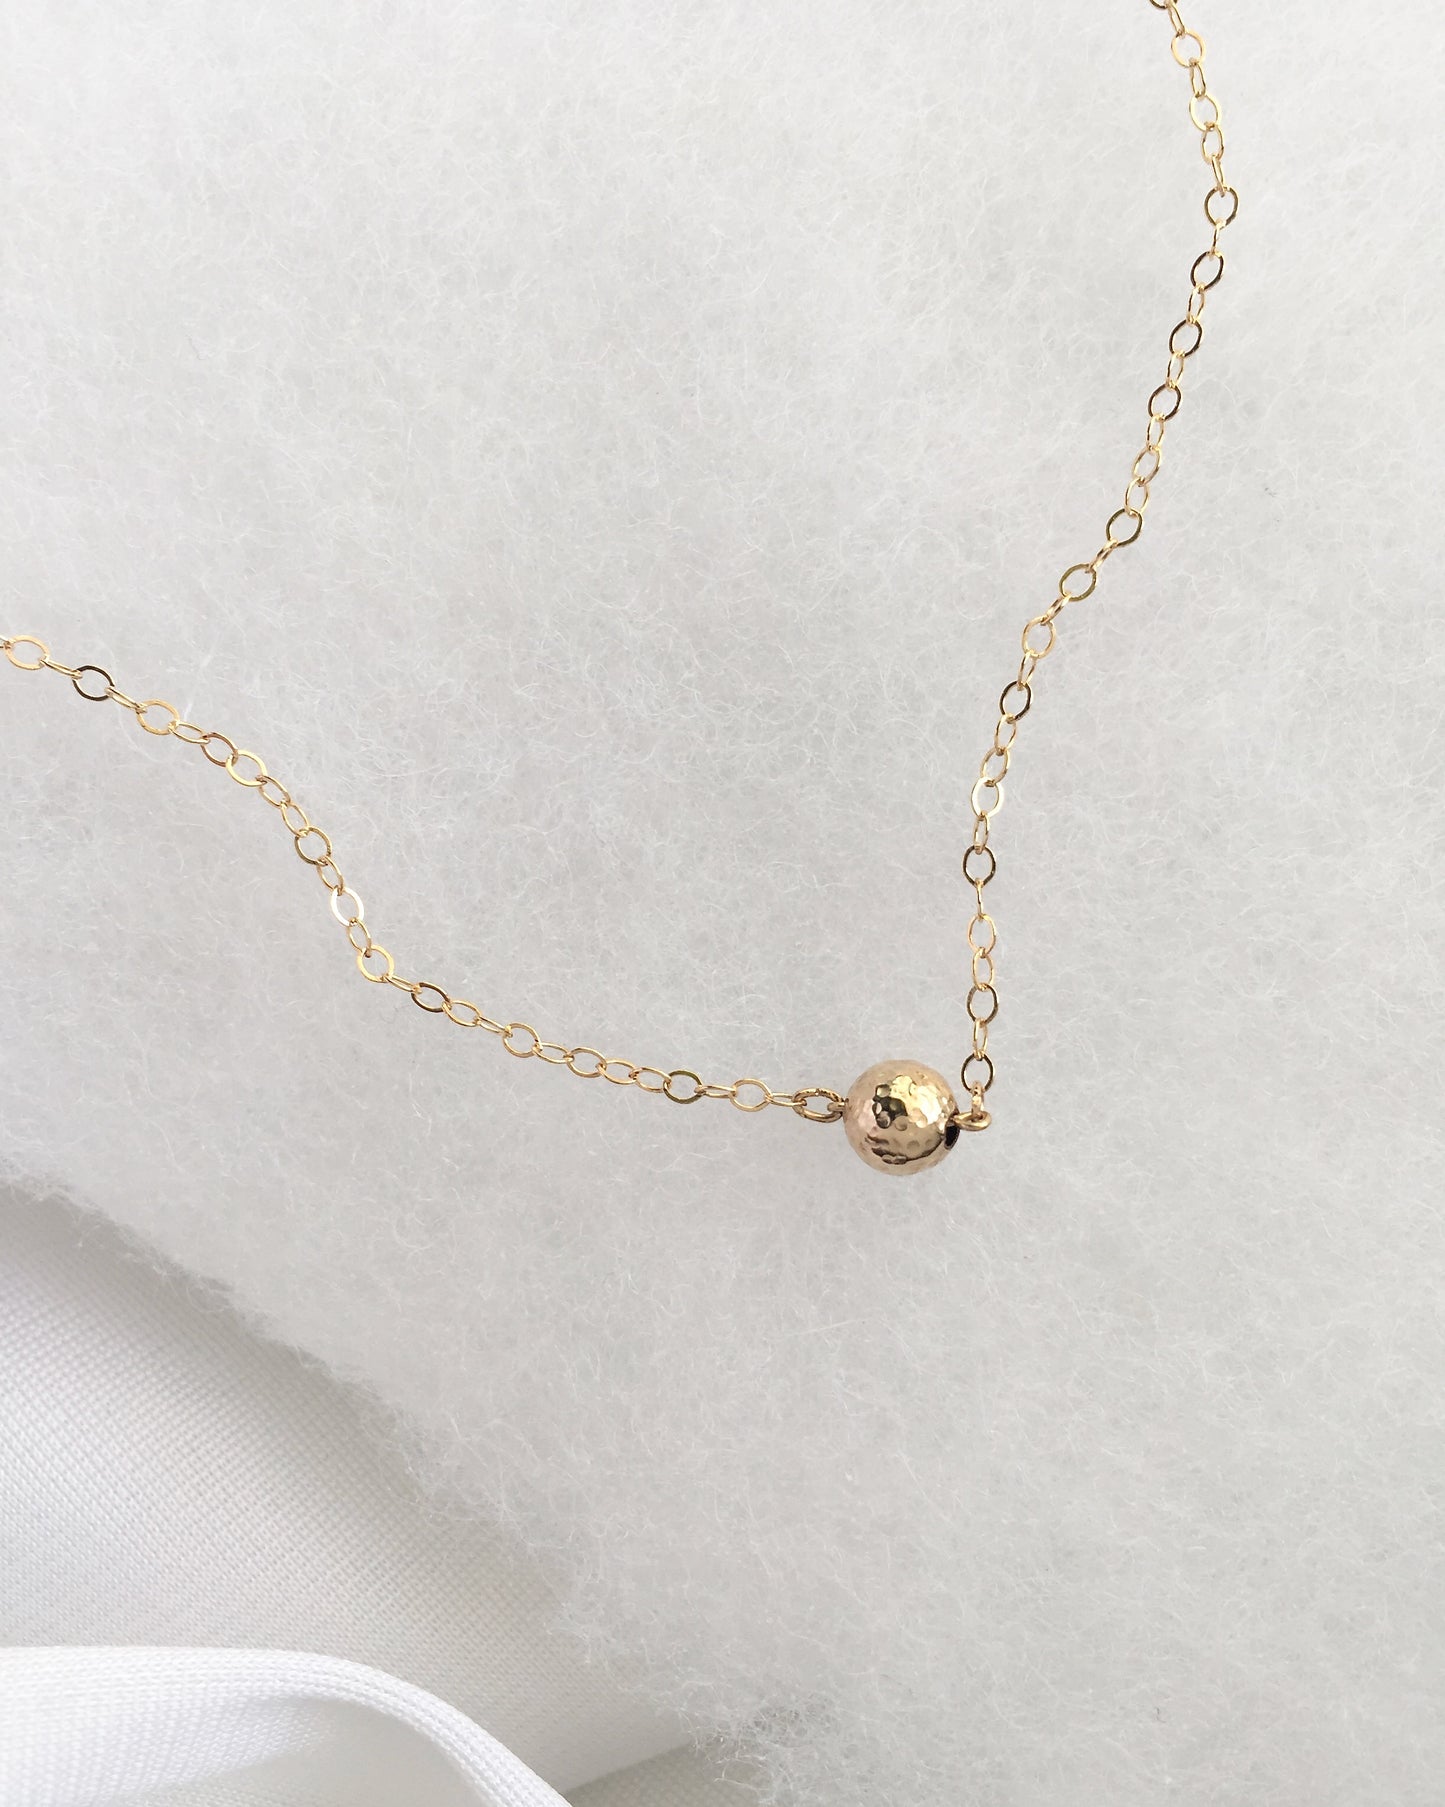 Simple Tiny Ball Necklace in Gold Filled or Sterling Silver | IB Jewelry